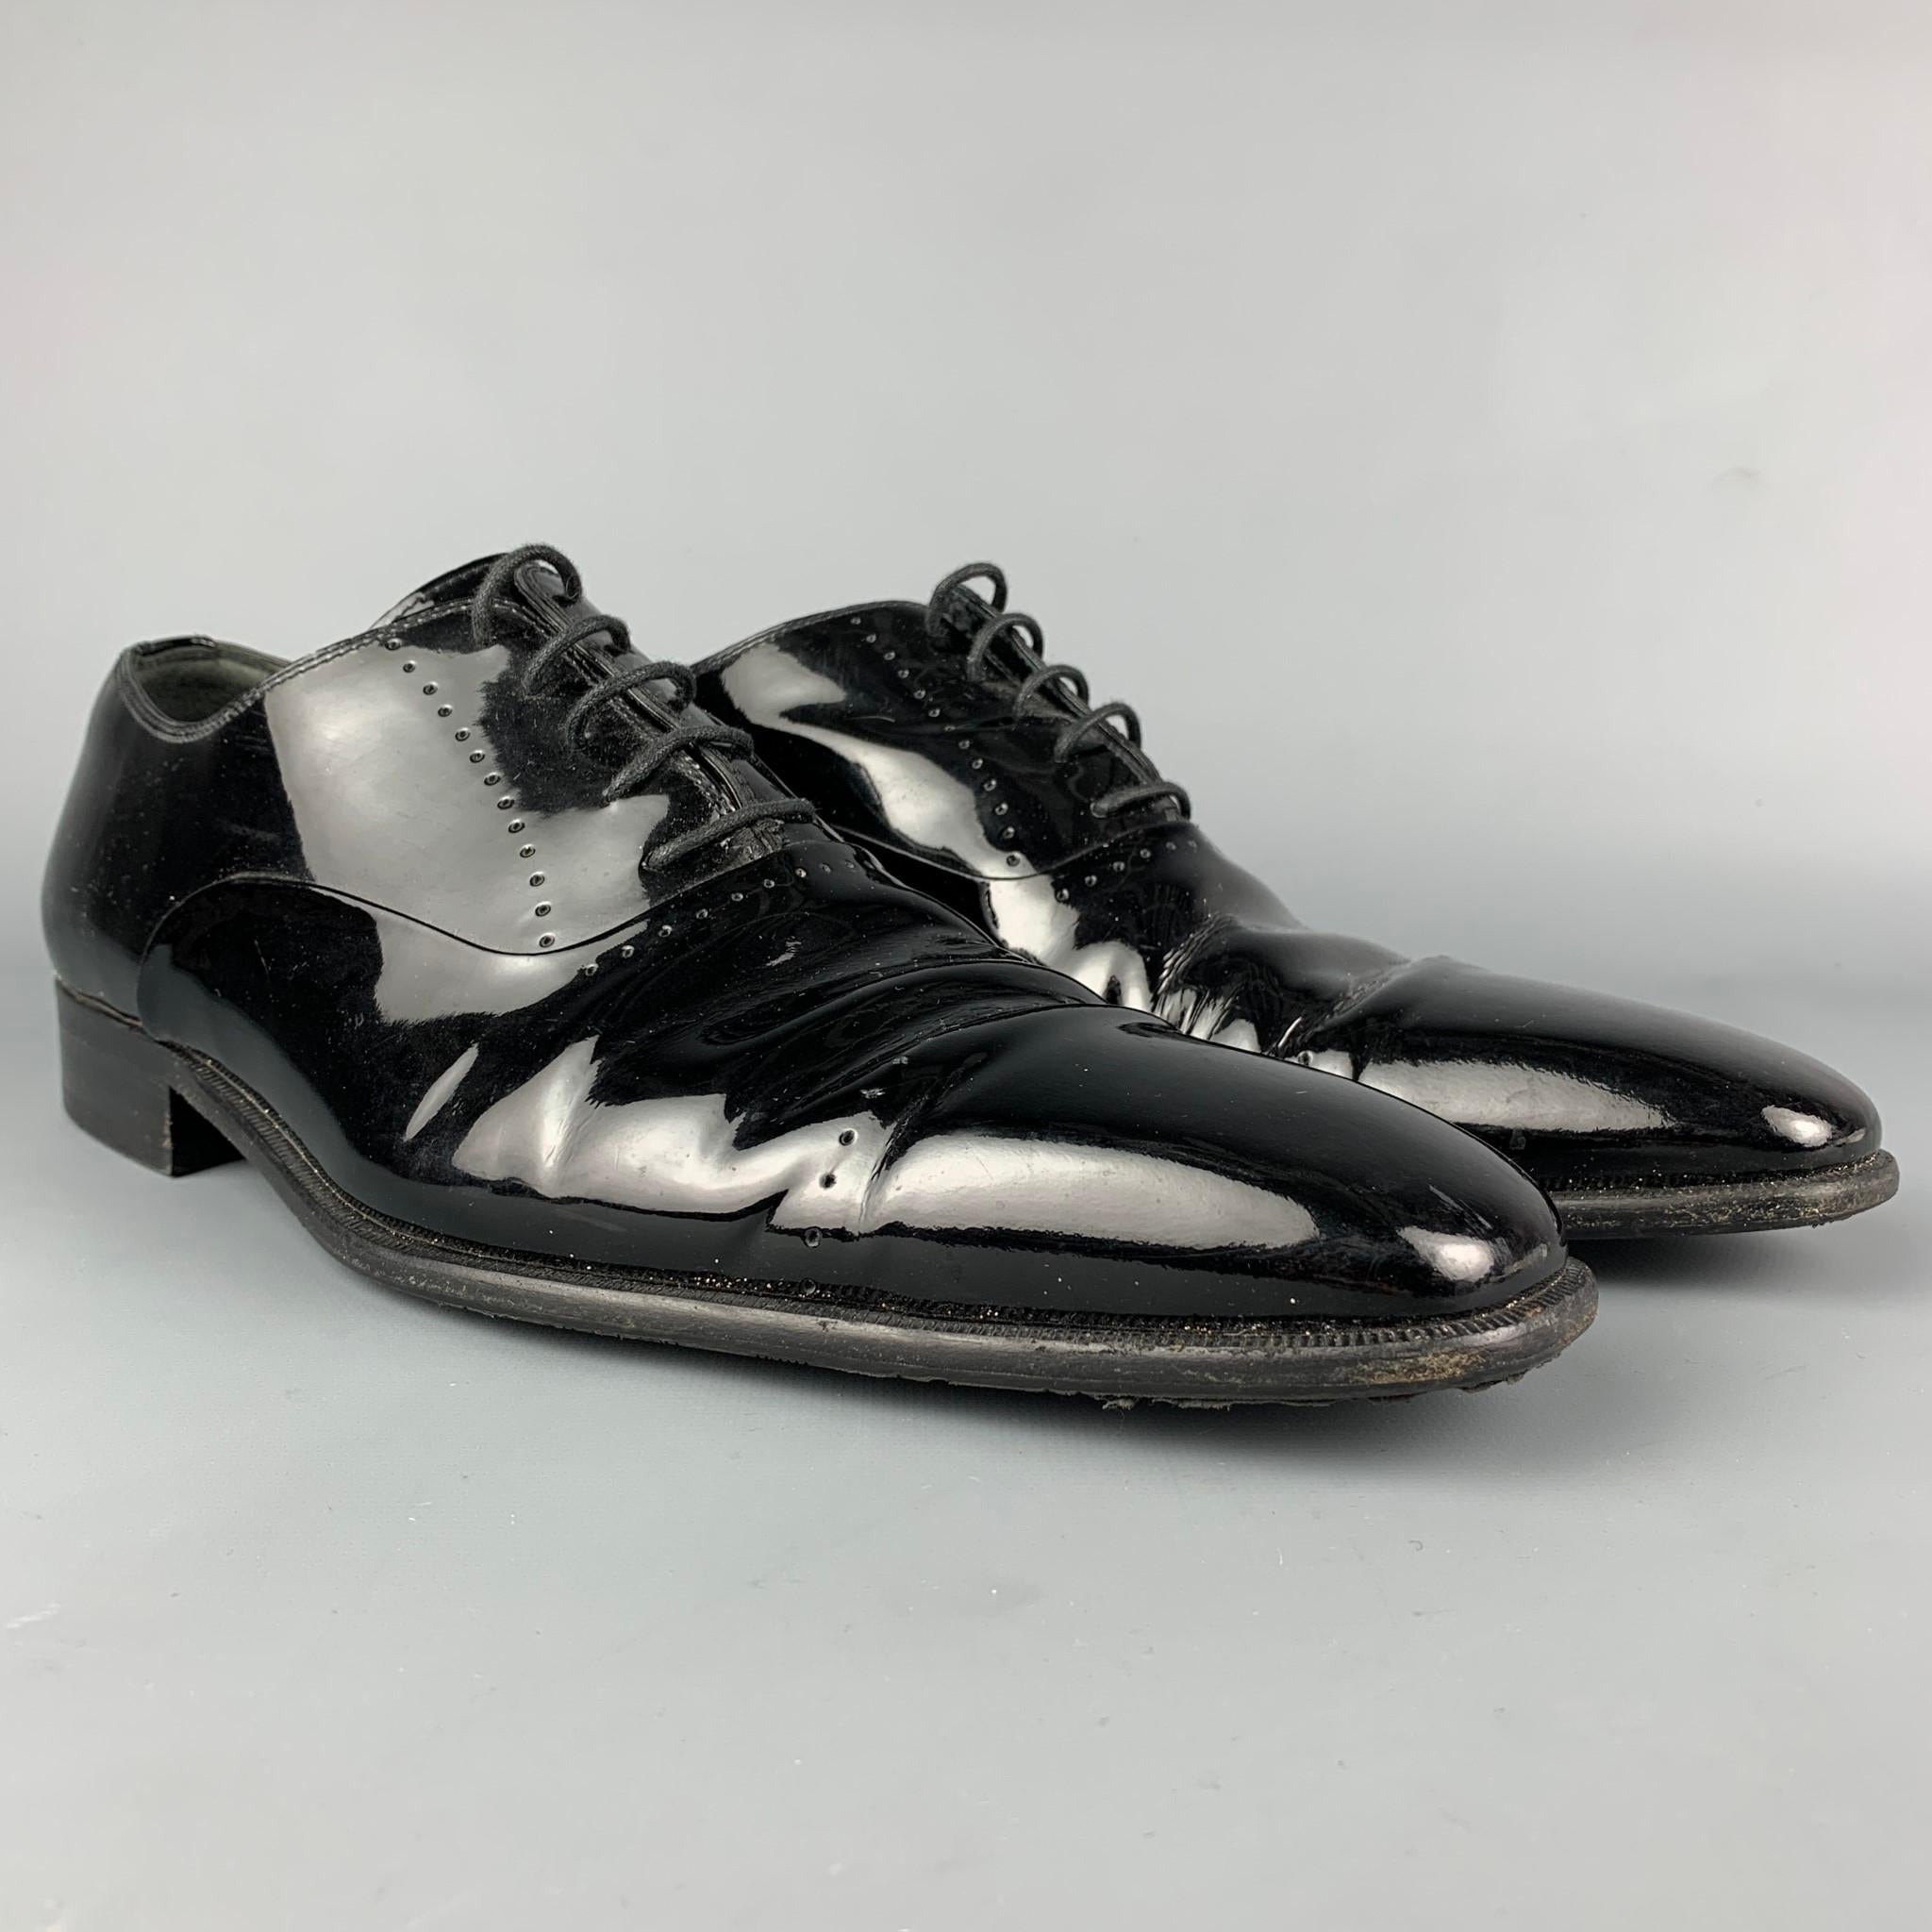 BALLY shoes comes in a black perforated patent leather featuring a square toe and a lace up closure. Made in Italy. 

Good Pre-Owned Condition. Minor wear.
Marked: 10.5 EU / 11.5 USA

Outsole: 13 in. x 4.5 in. 